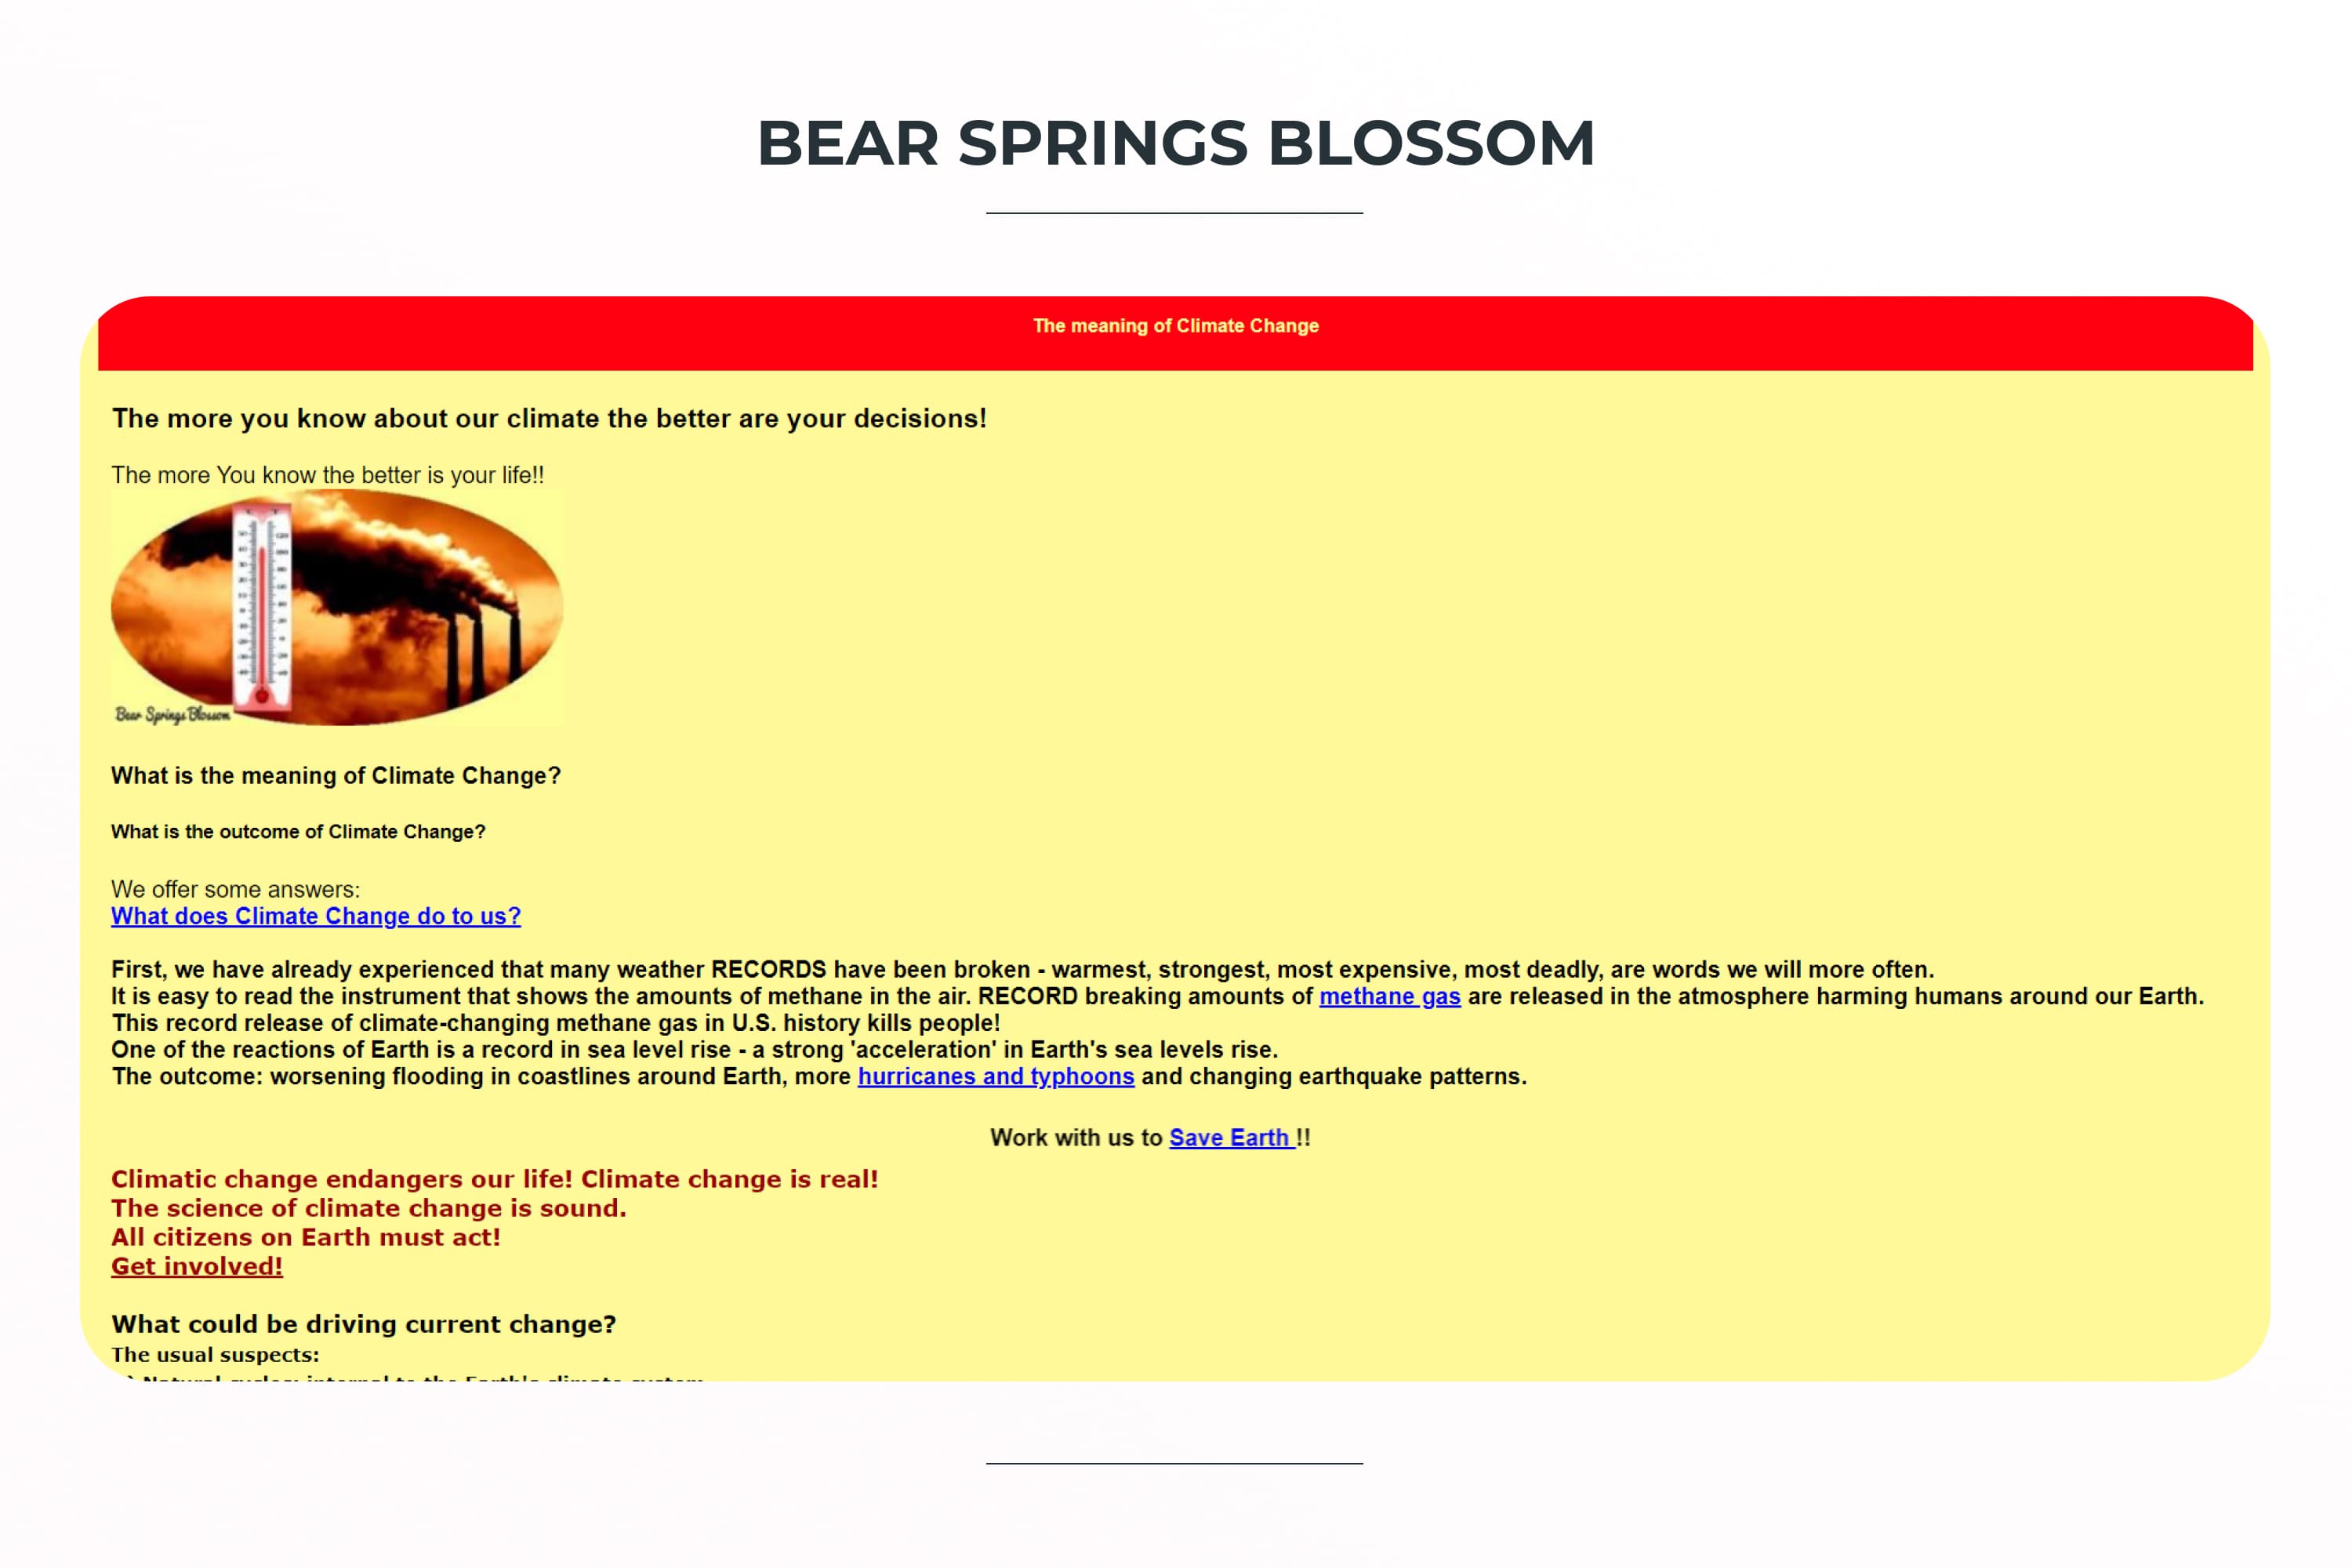 Main page of the Bear Springs Blossom website.